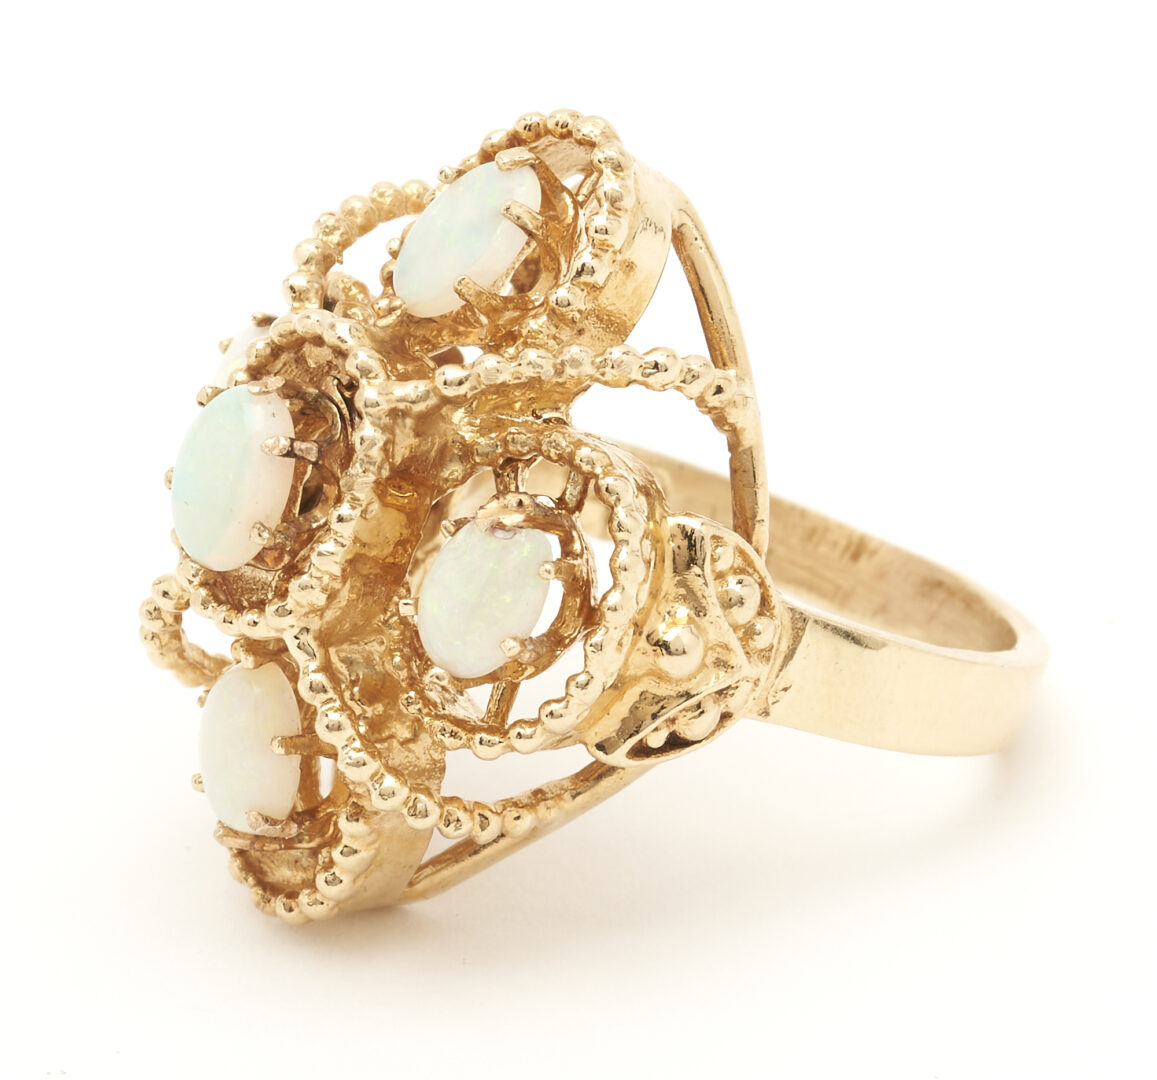 Lot 1136: Ladies 14K Gold & Opal Cocktail Ring